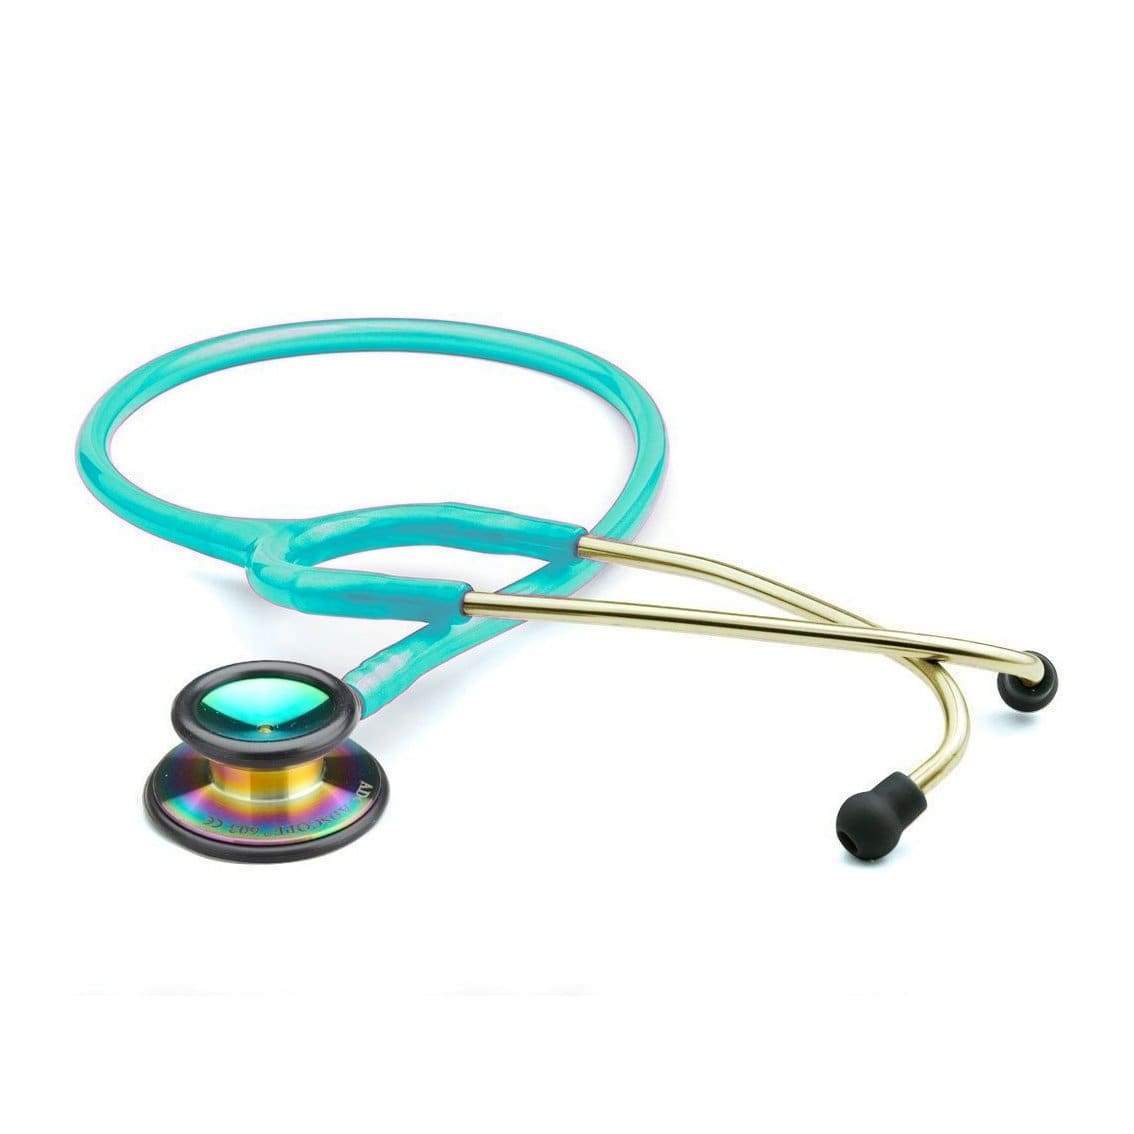 Spirit Medical Classic Stethoscopes Pearl Teal Rainbow Spirit Classic Stethoscope CK-S601PF